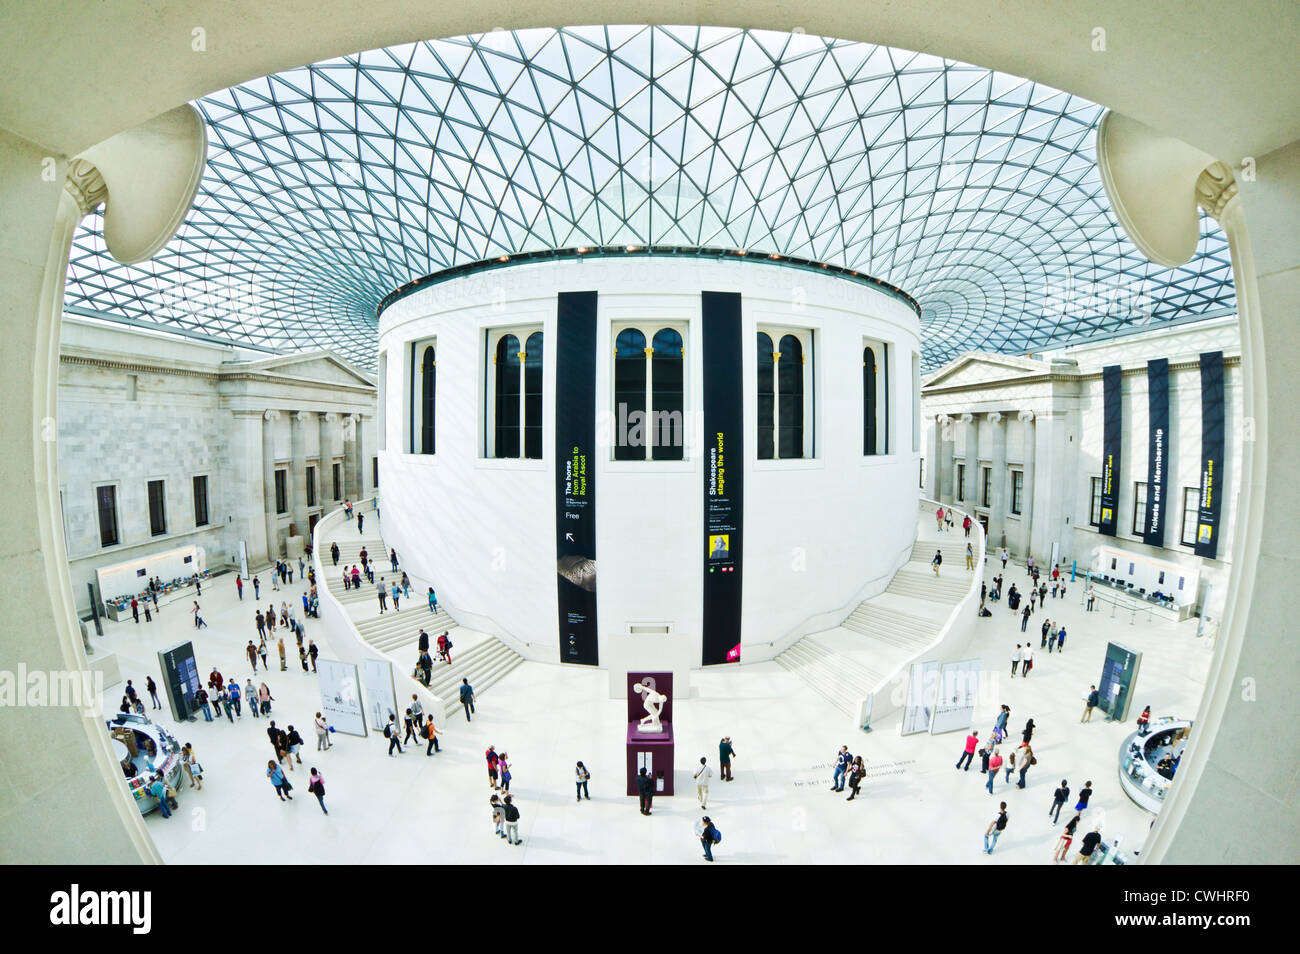 British Museum London Queen Elizabeth II 'Great Court' glass roof designed by architect Norman Foster London  UK GB EU Europe Stock Photo